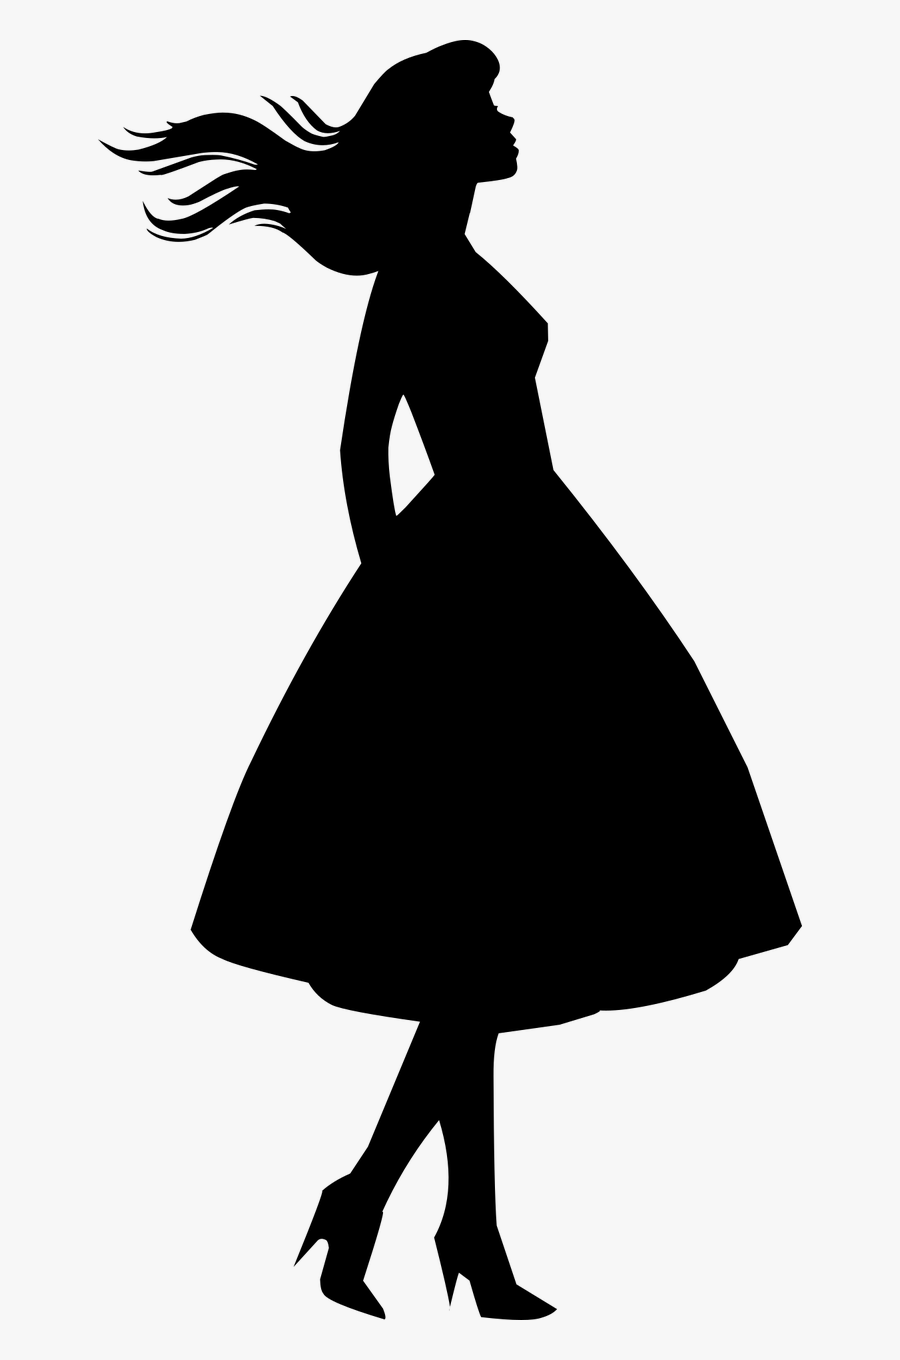 Dress, Woman, Silhouette, Female, Beautiful, Beauty, - Woman In Dress Silhouette Png, Transparent Clipart